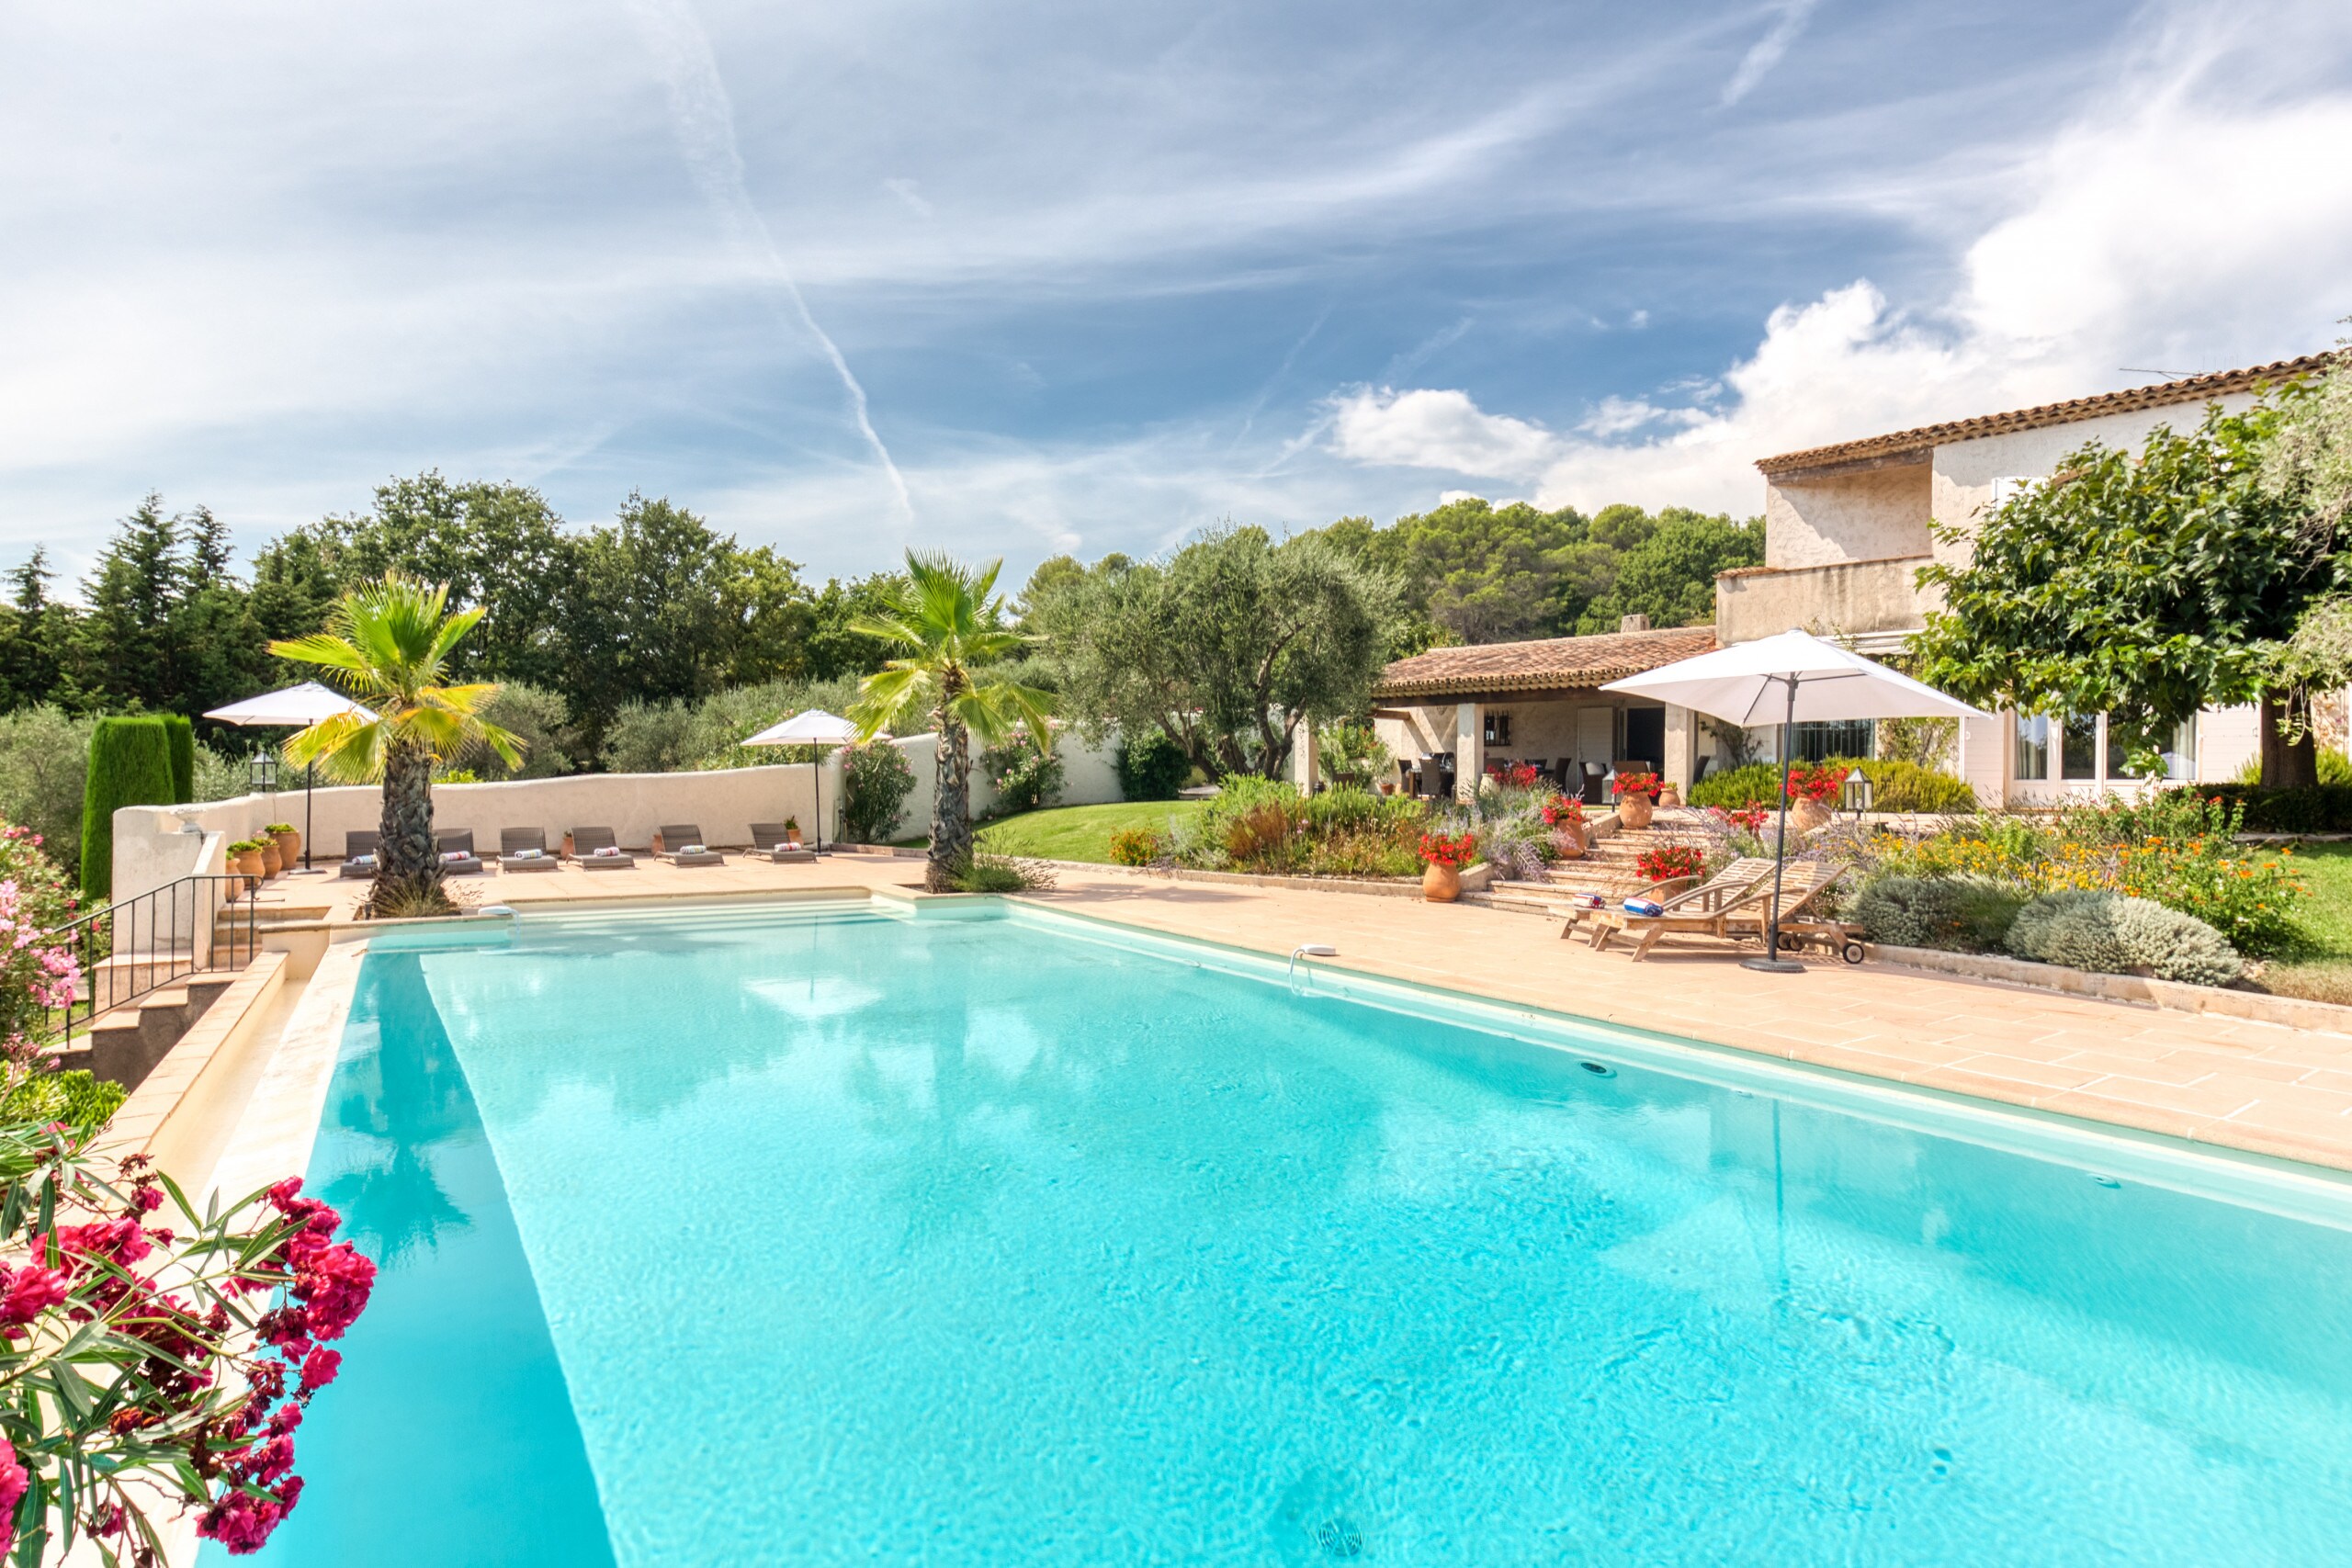 Property Image 2 - Beautiful family villa with saline pool, A/C and olive grove, only 15 minutes’ walk to Valbonne village